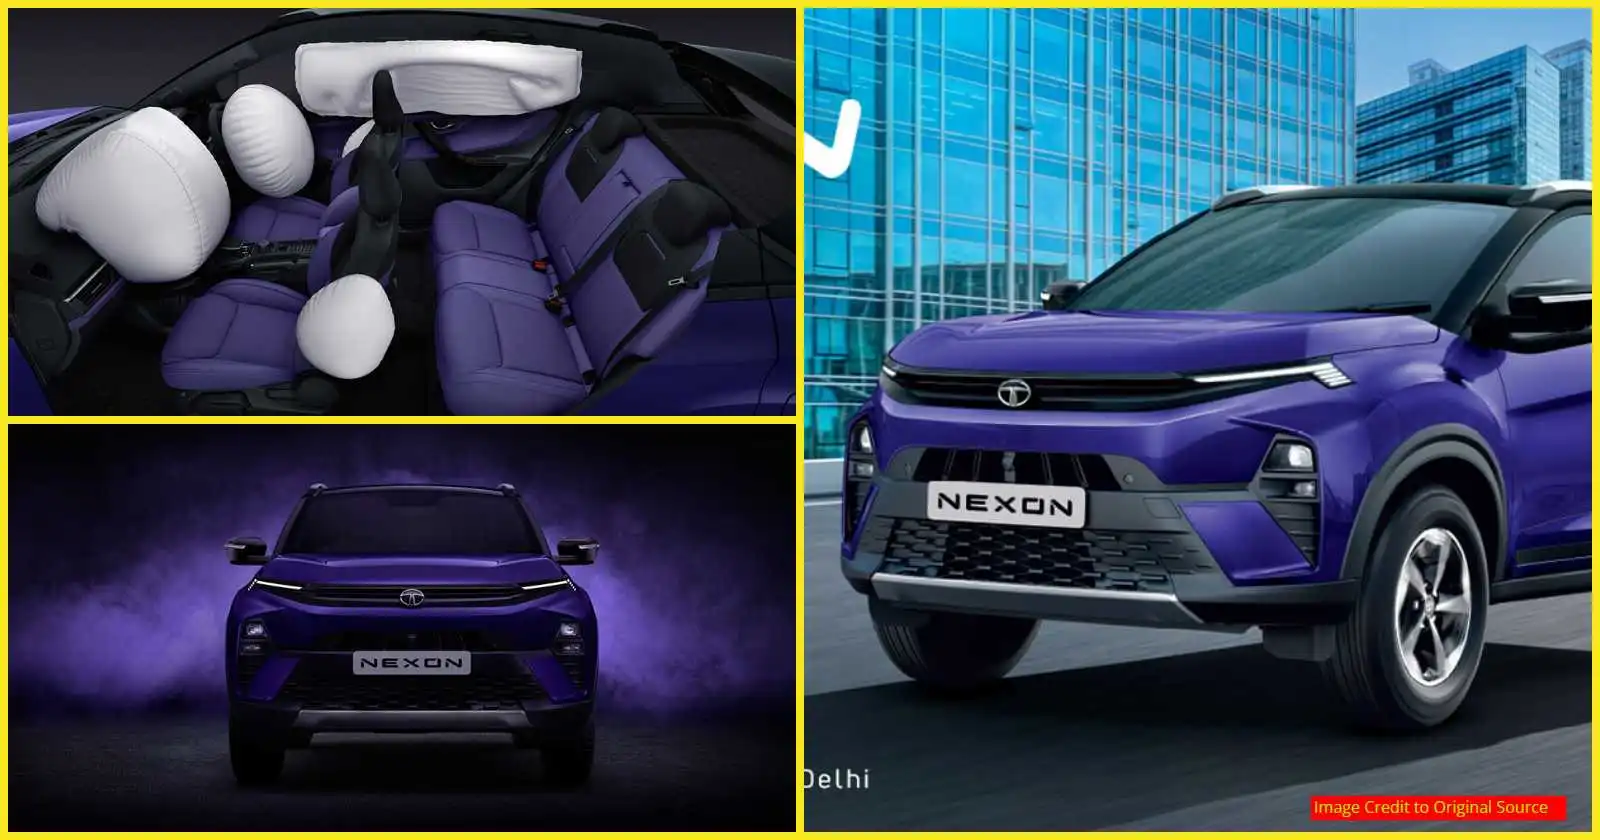 New Tata Nexon facelift Complete Details - Explained in Kannada by Automobile News Kannada